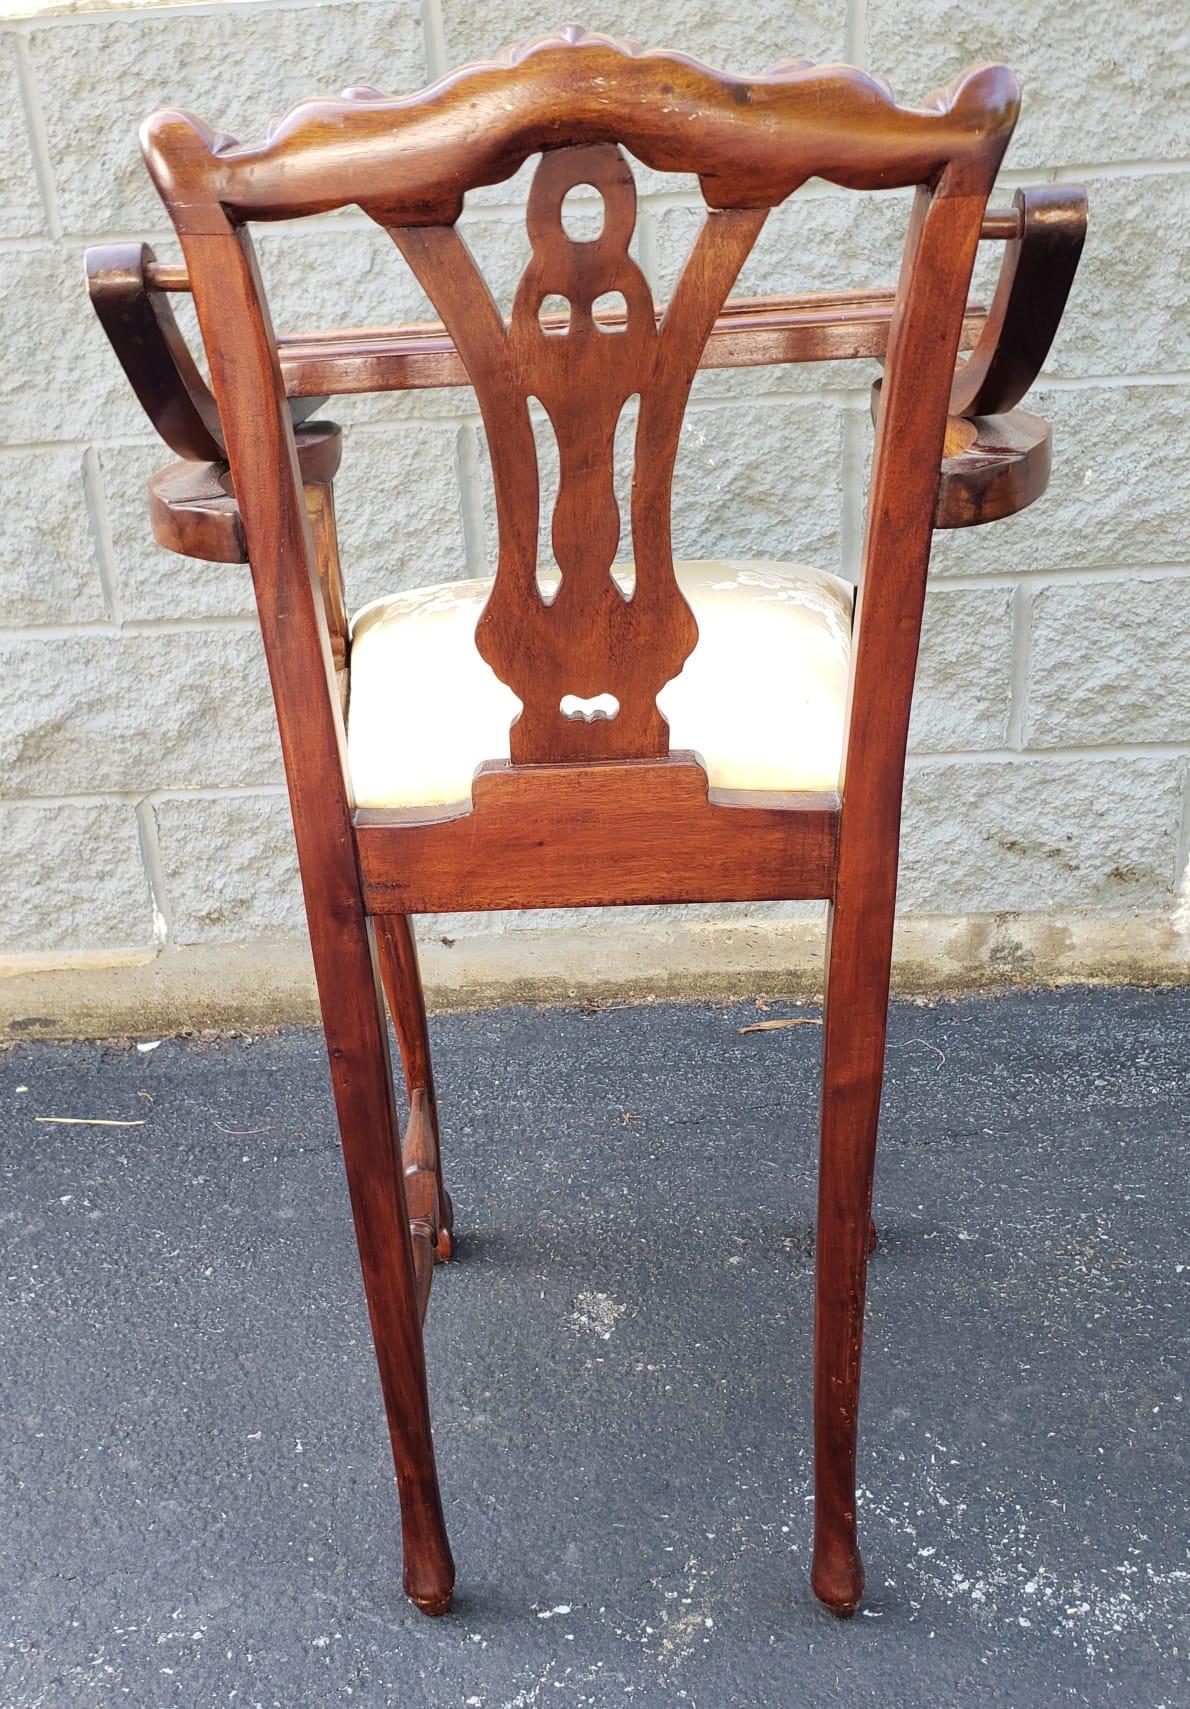 A very rare, Mid-Century hand-crafted Mahogany Chippendale Style Fruitwood High Chair with Tray with cabriole legs carved with acanthus leaves and terminating with ball and claw feet.  Measures 20